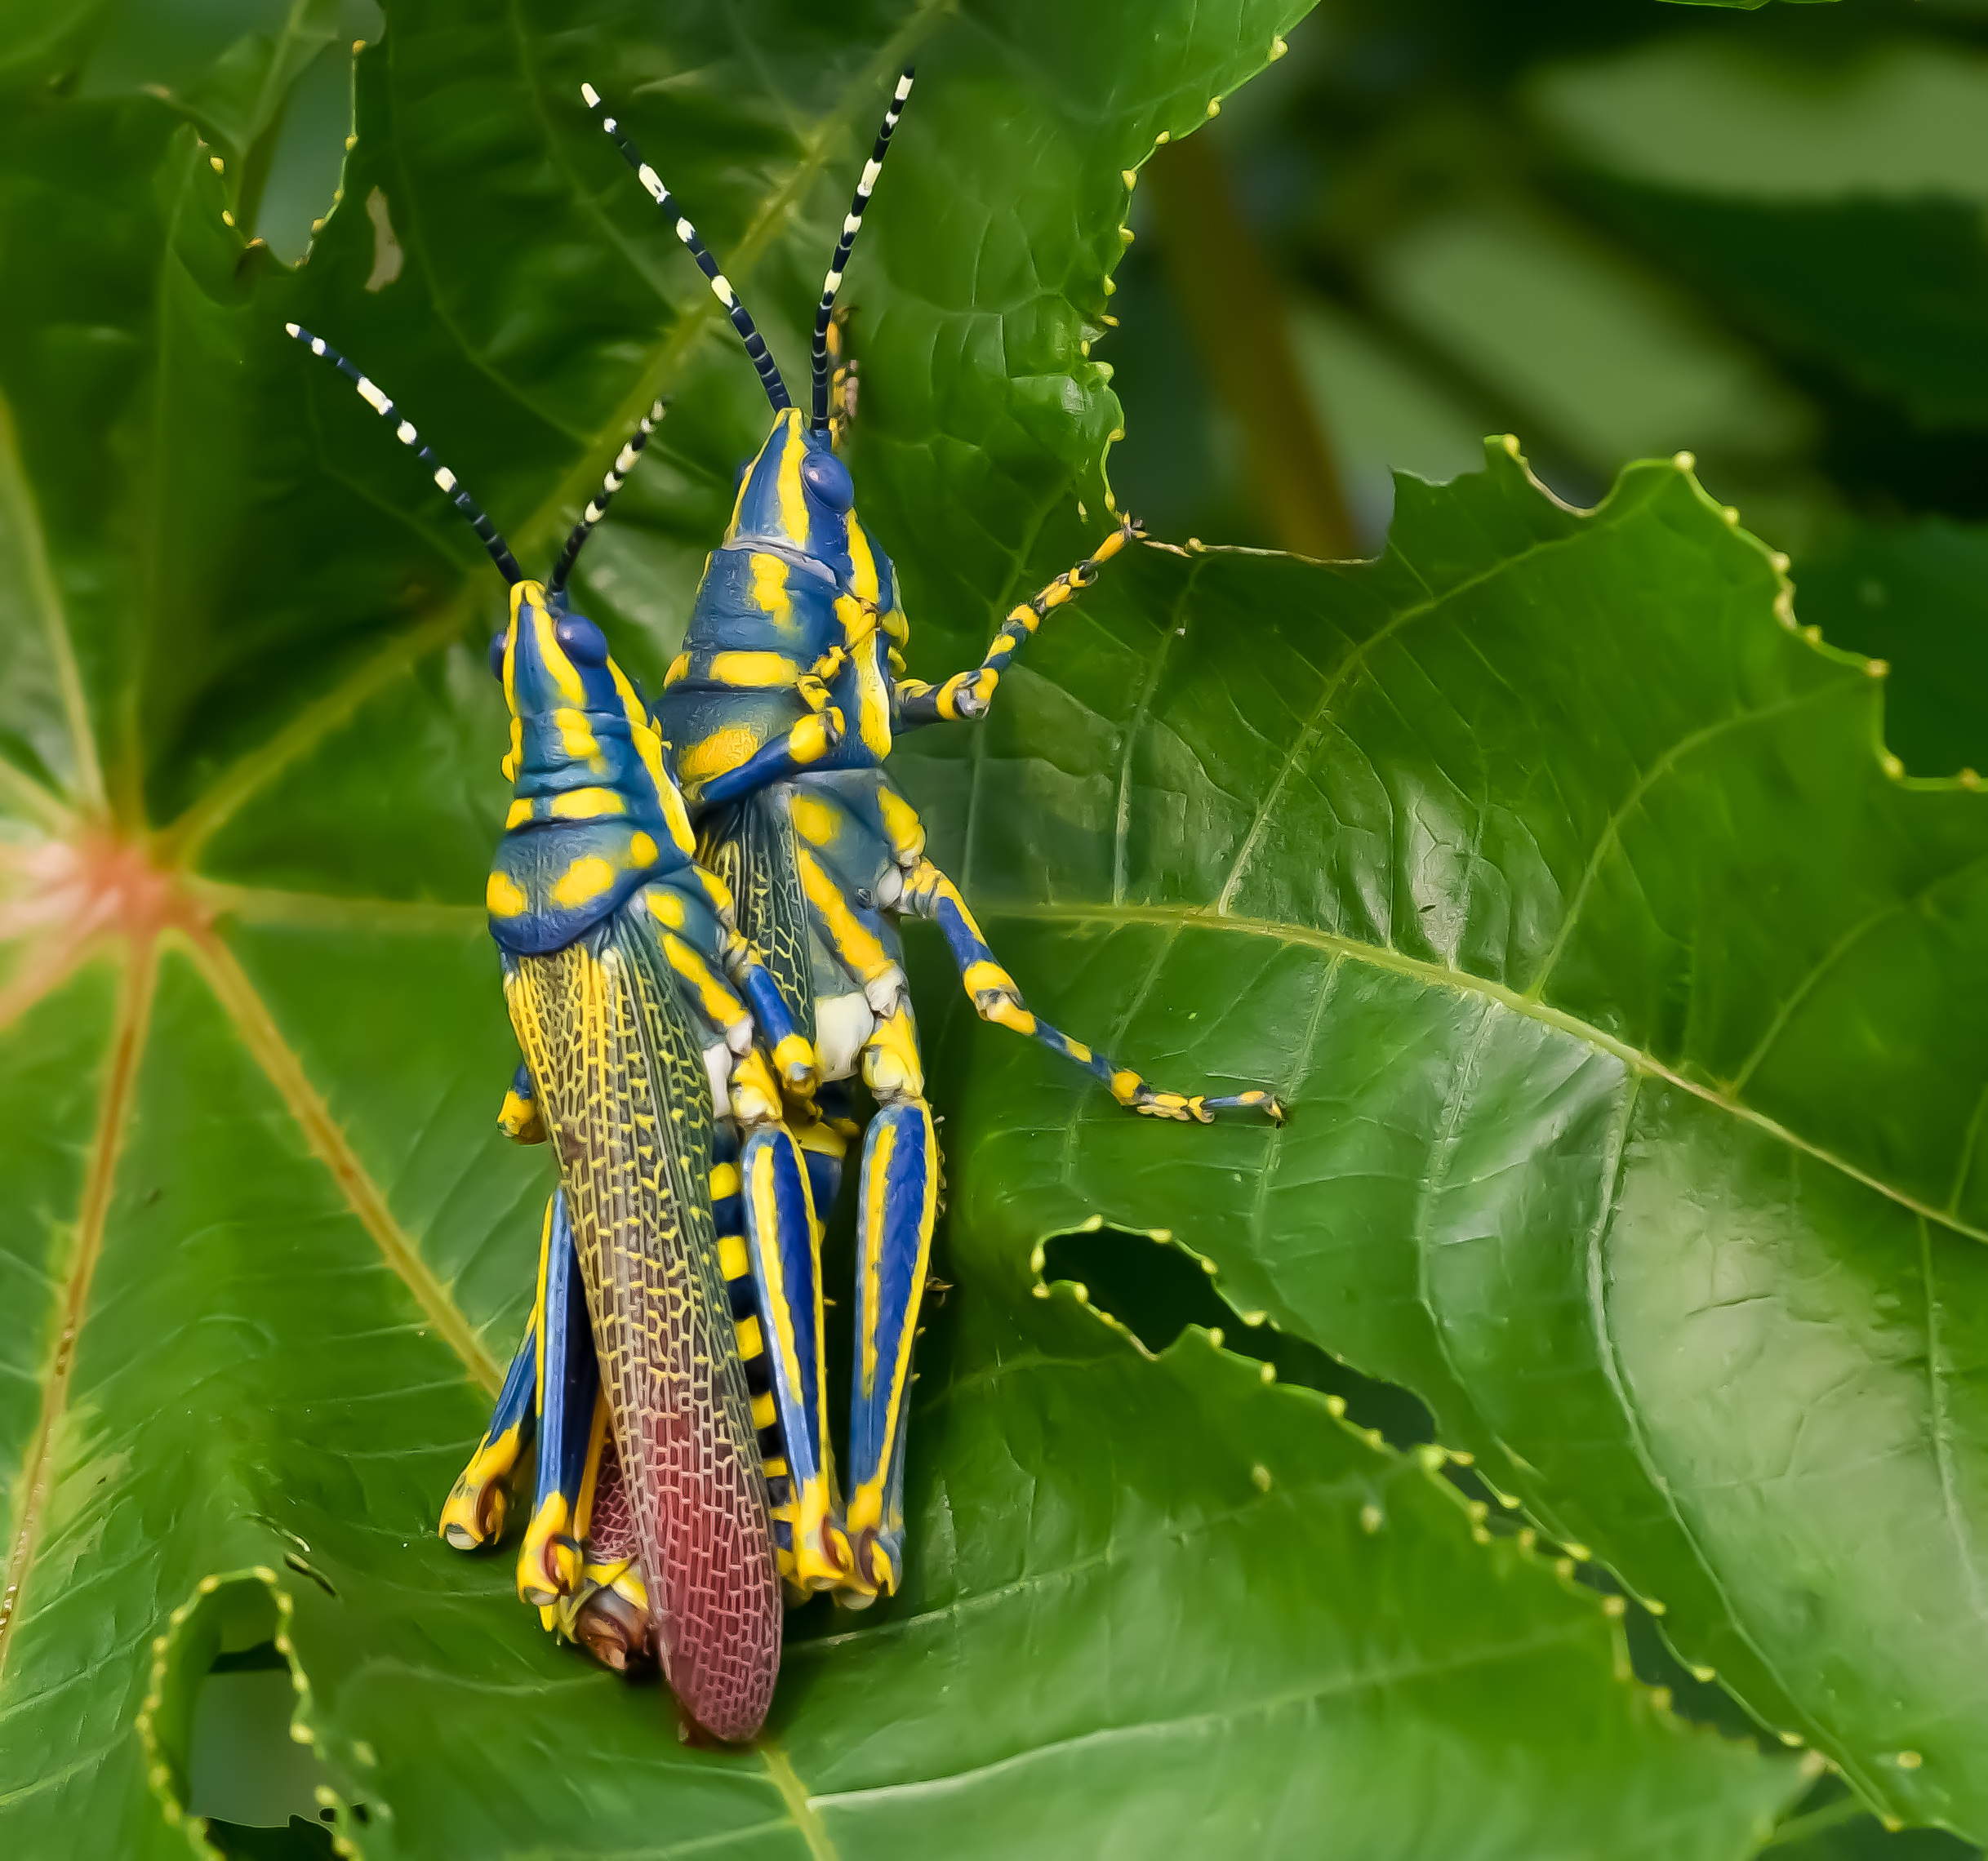 Insects mating